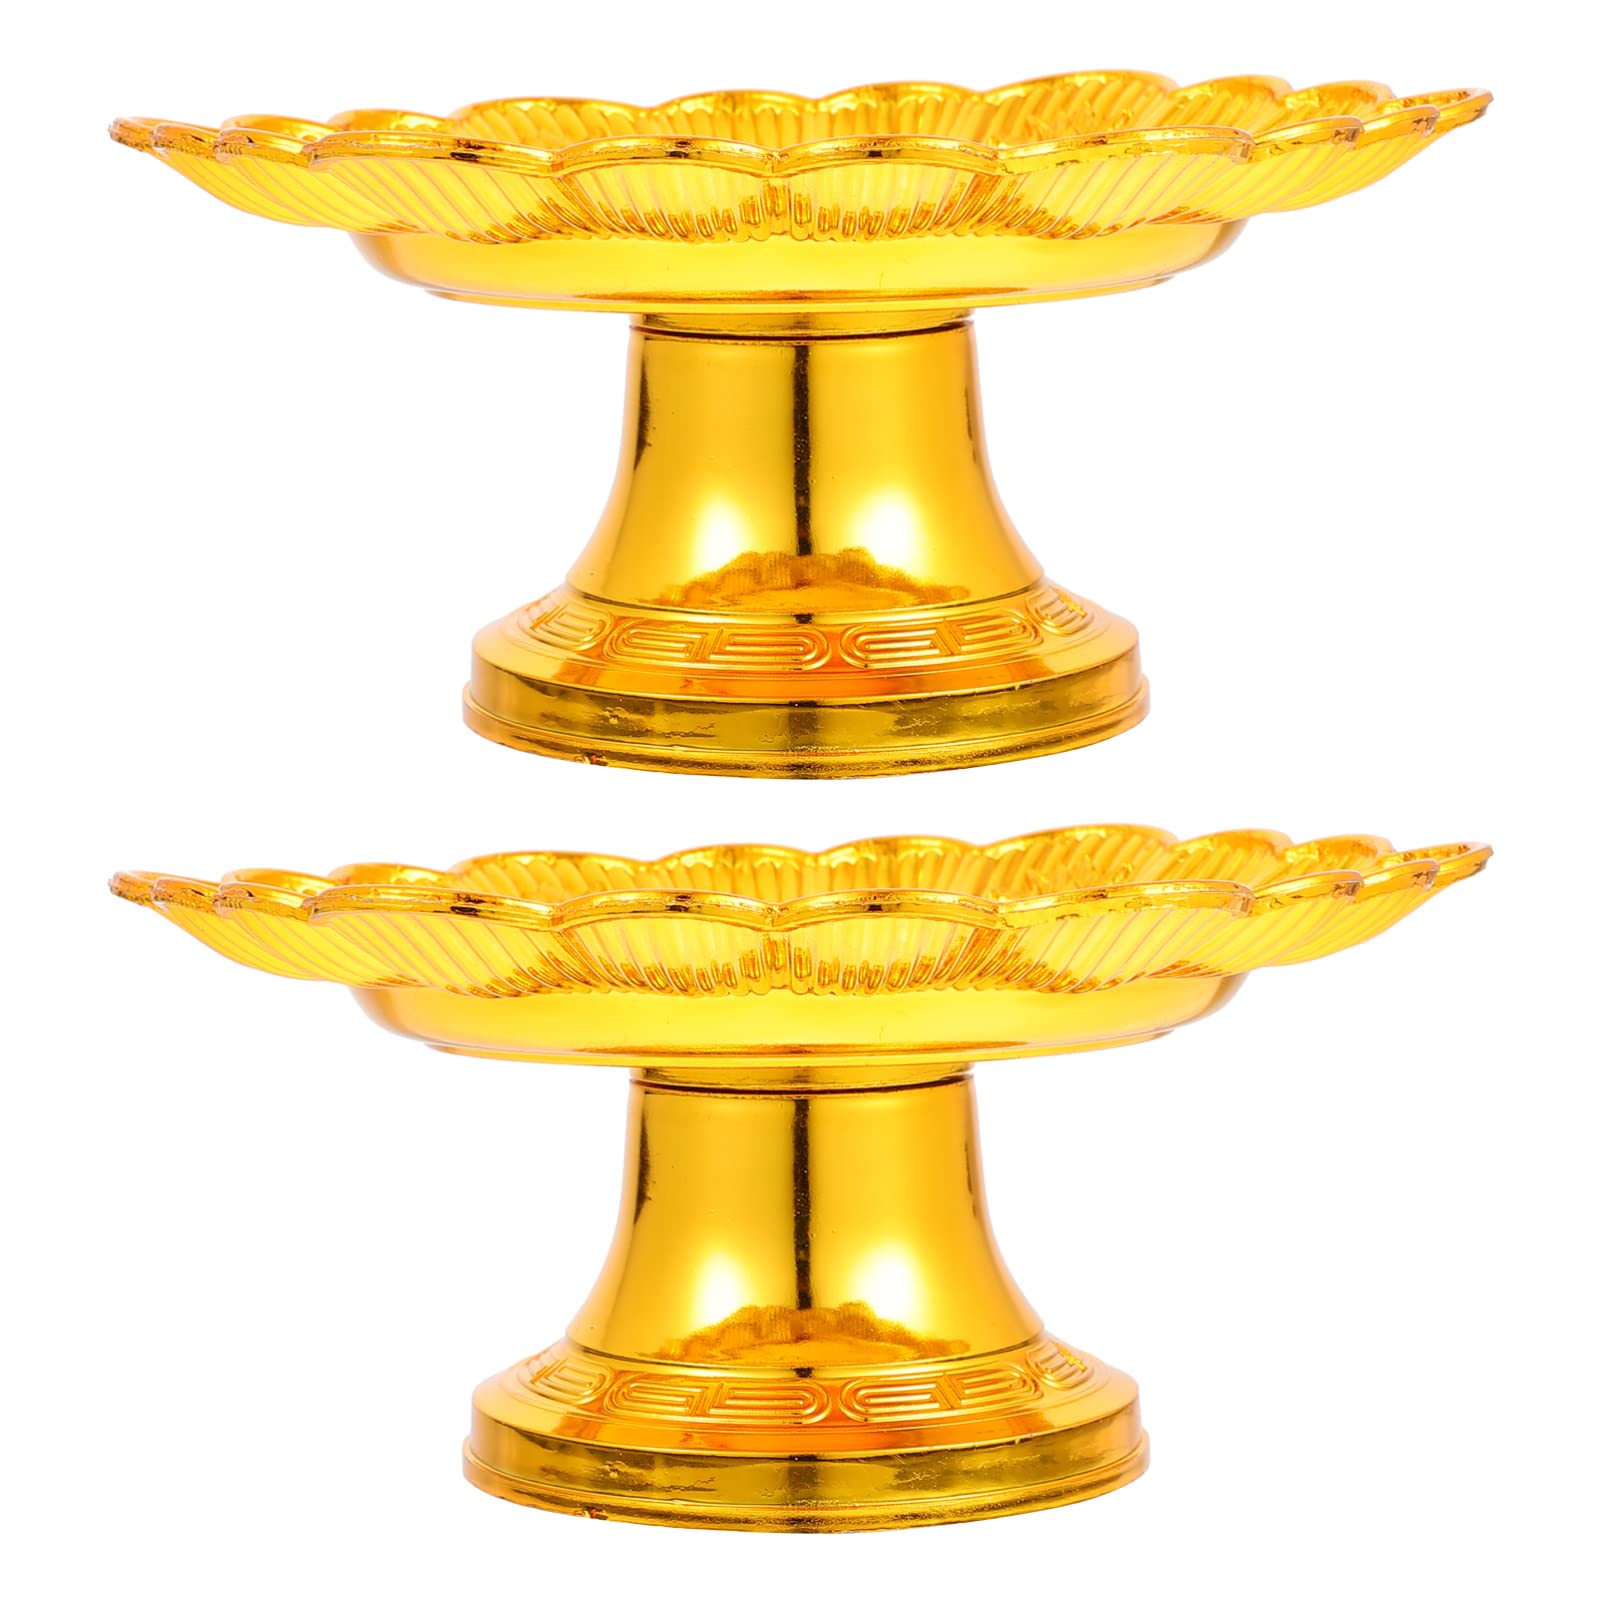 WINOMO 2Pcs Buddhist Fruit Plate Buddhist Supplies Temple Offering Plate Fruit Tray Food Dessert Snack Blessing Fruit Tray Tinplate Bowl for Home Party Decorations